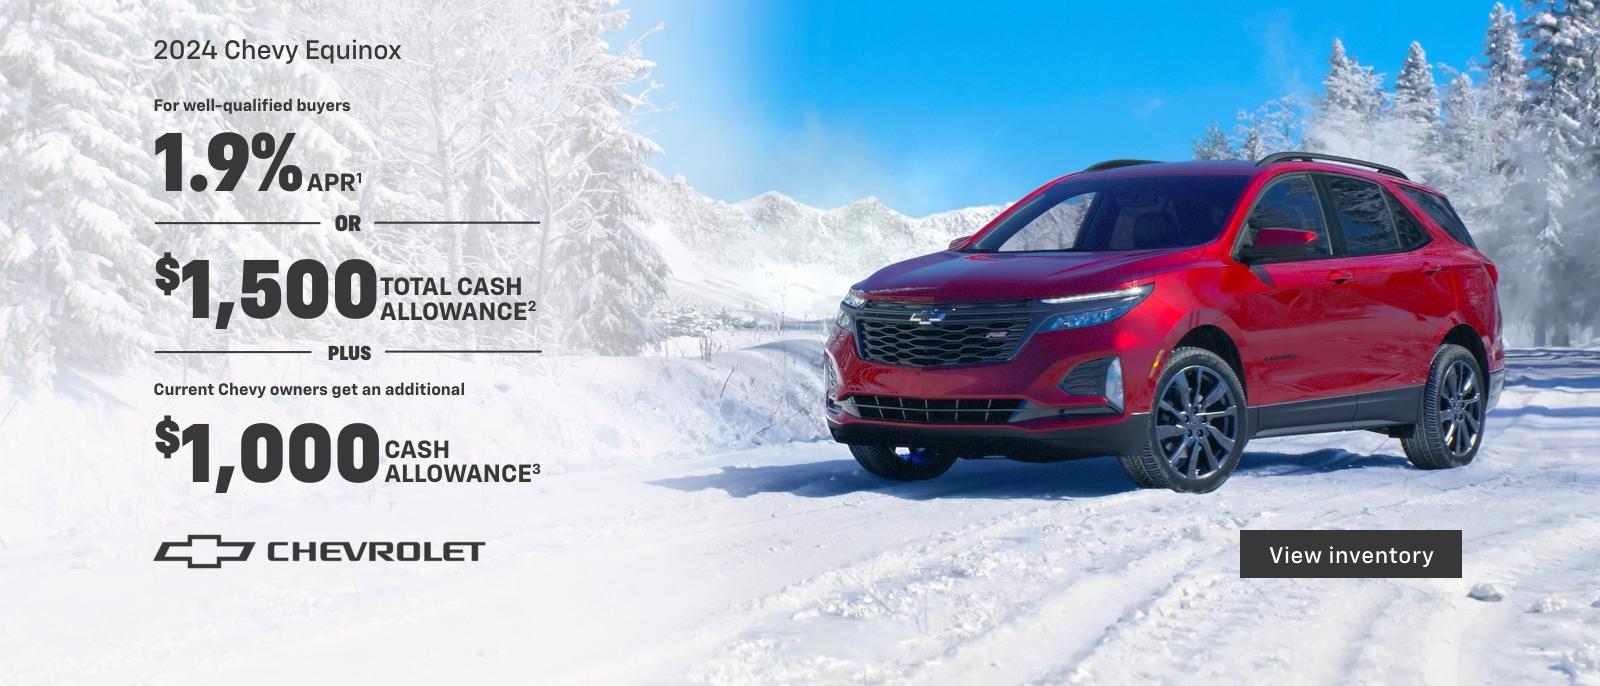 2024 Chevy Equinox. For well-qualified buyers 1.9% APR. Or, $1,500 total cash allowance. Plus, current Chevy owners get an additional $1,000 cash allowance.